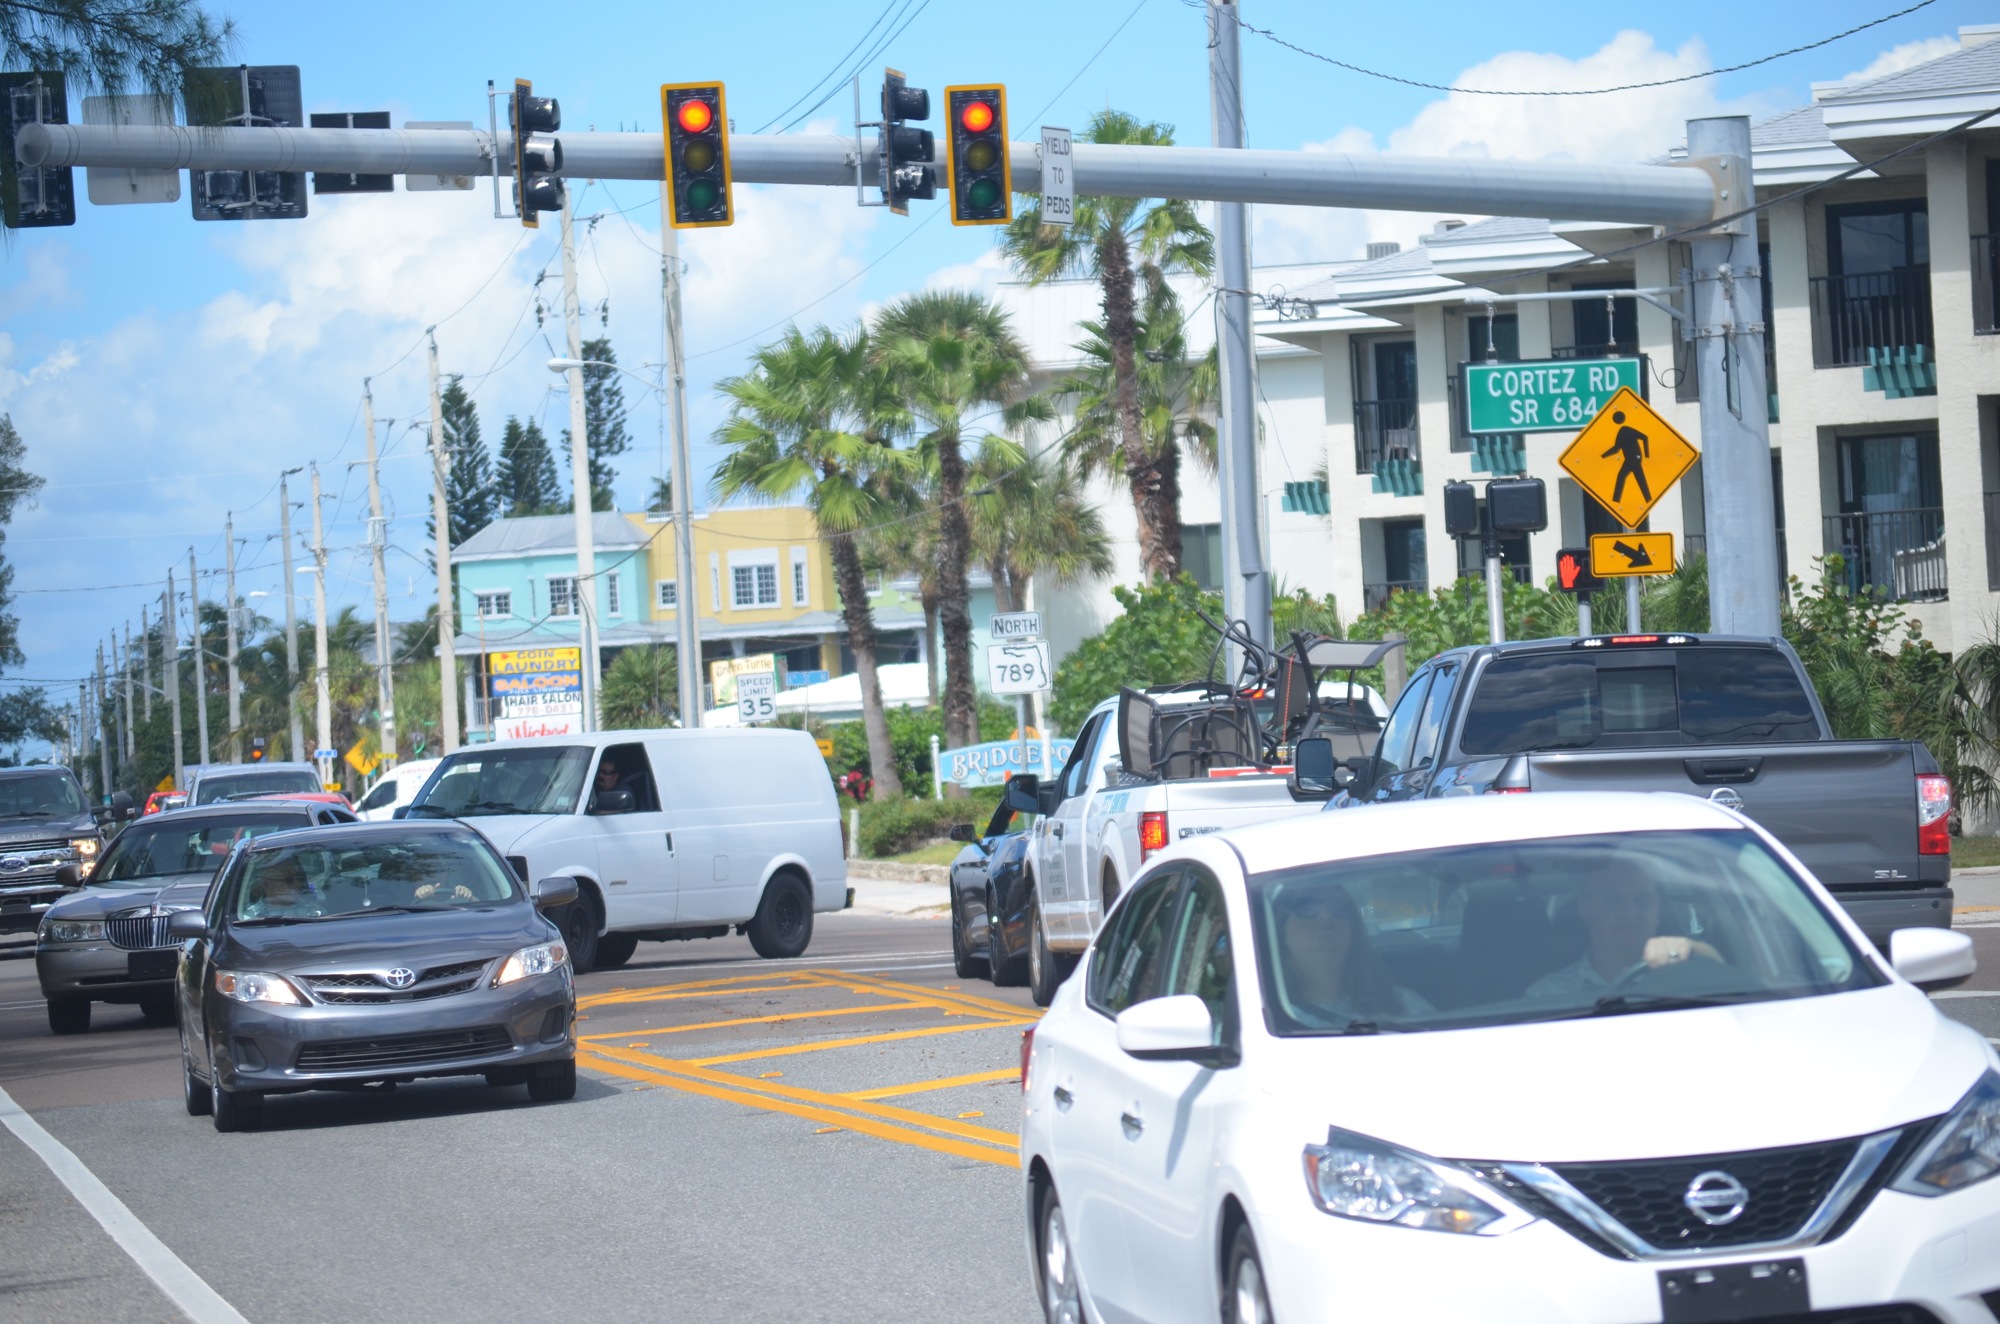 Longboat Key Commissioner Jack Daly calls the intersection of Gulf Drive and Cortez Road critical to the smooth flow of traffic on the barrier islands.